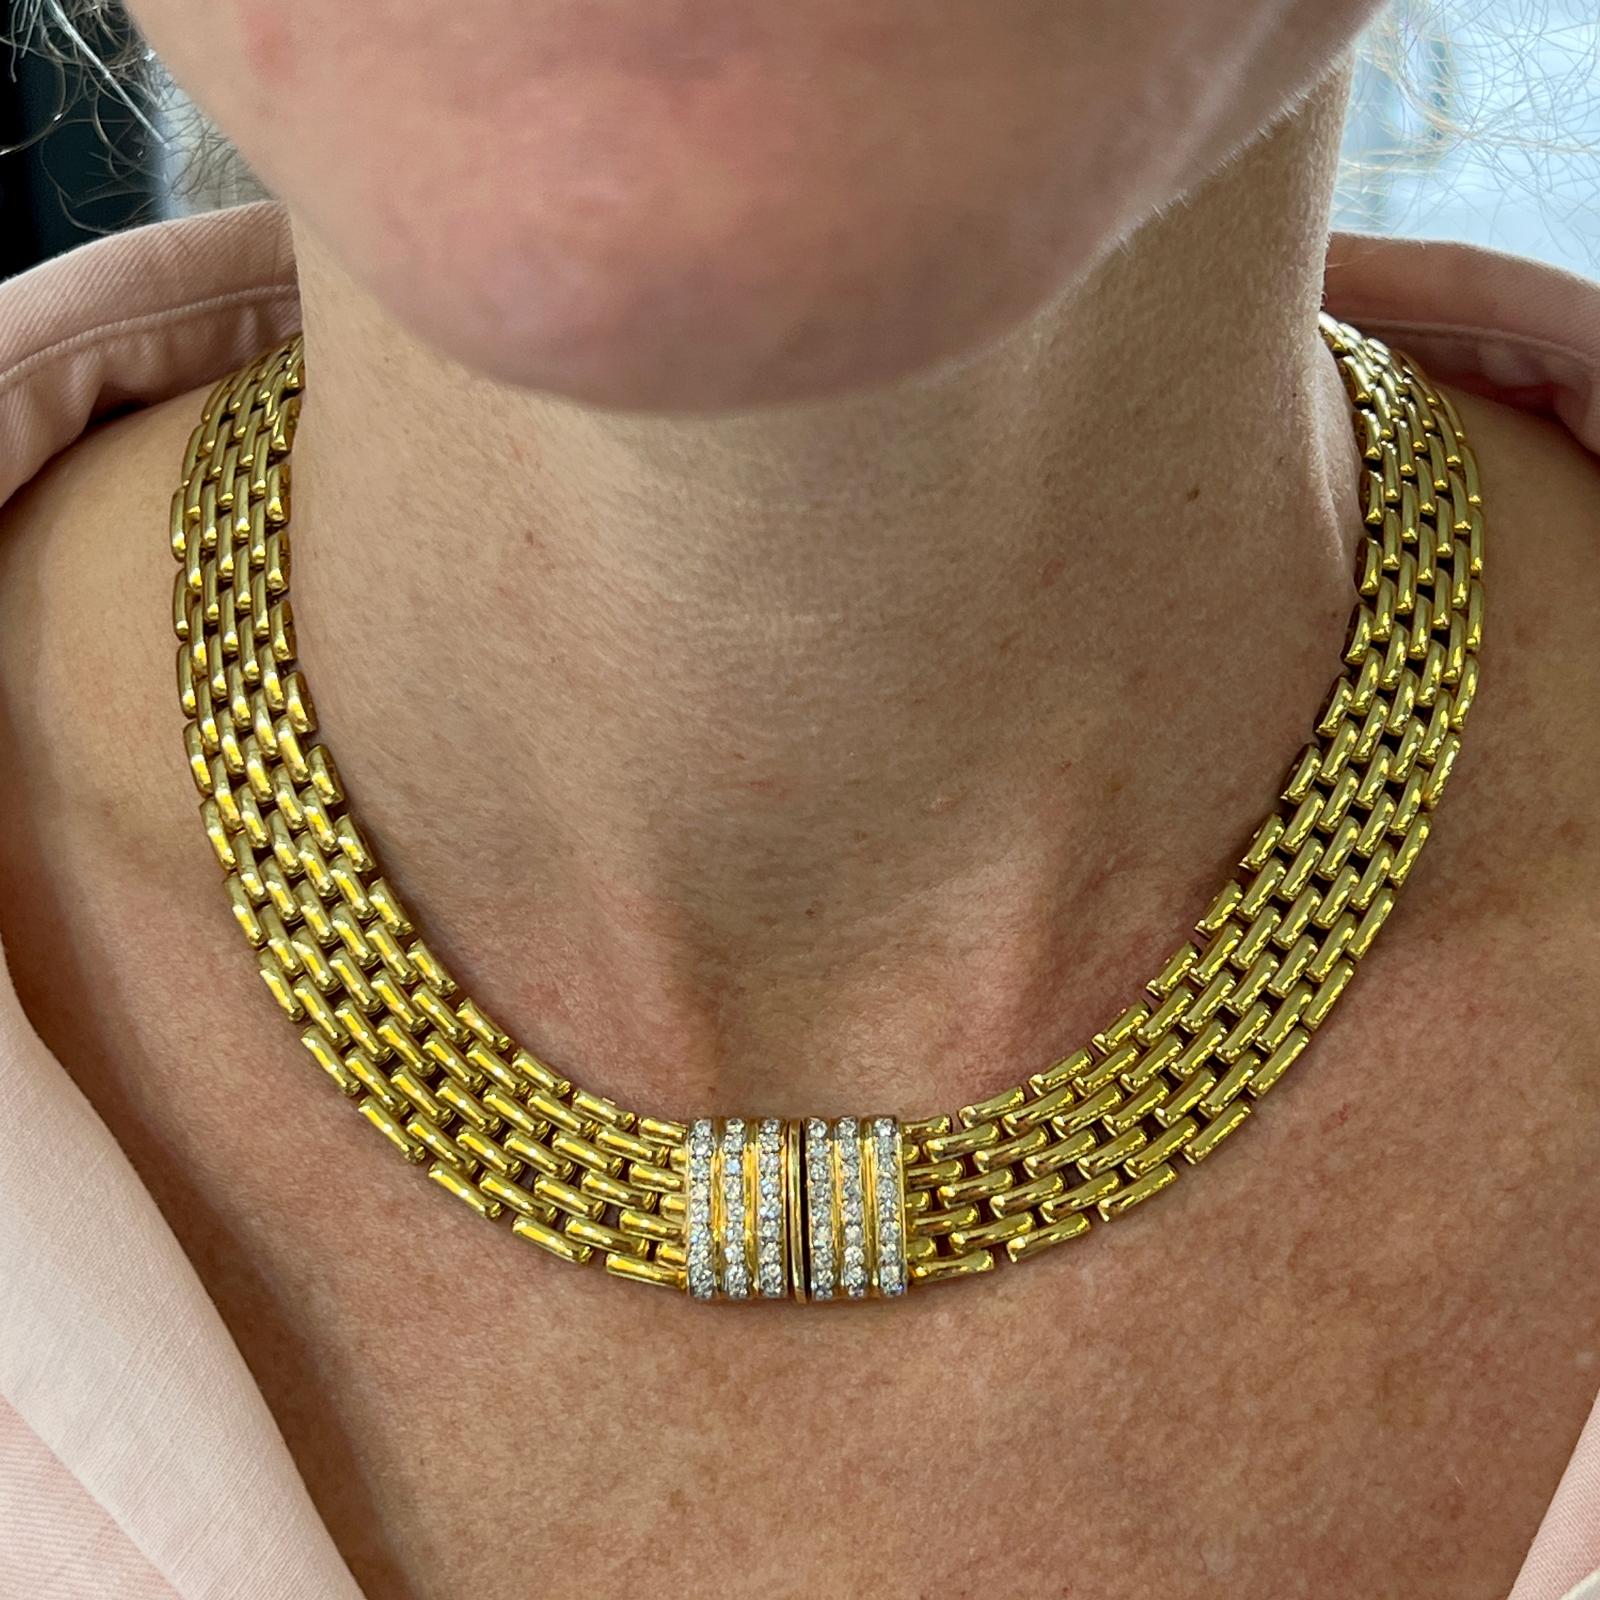 Beautiful and timeless panther link necklace crafted in 18 karat yellow gold. The necklace features 7 rows of panther links measuring 15 inches in length, and 15mm in width. The diamond clasp is set with 54 round brilliant cut diamonds weighing